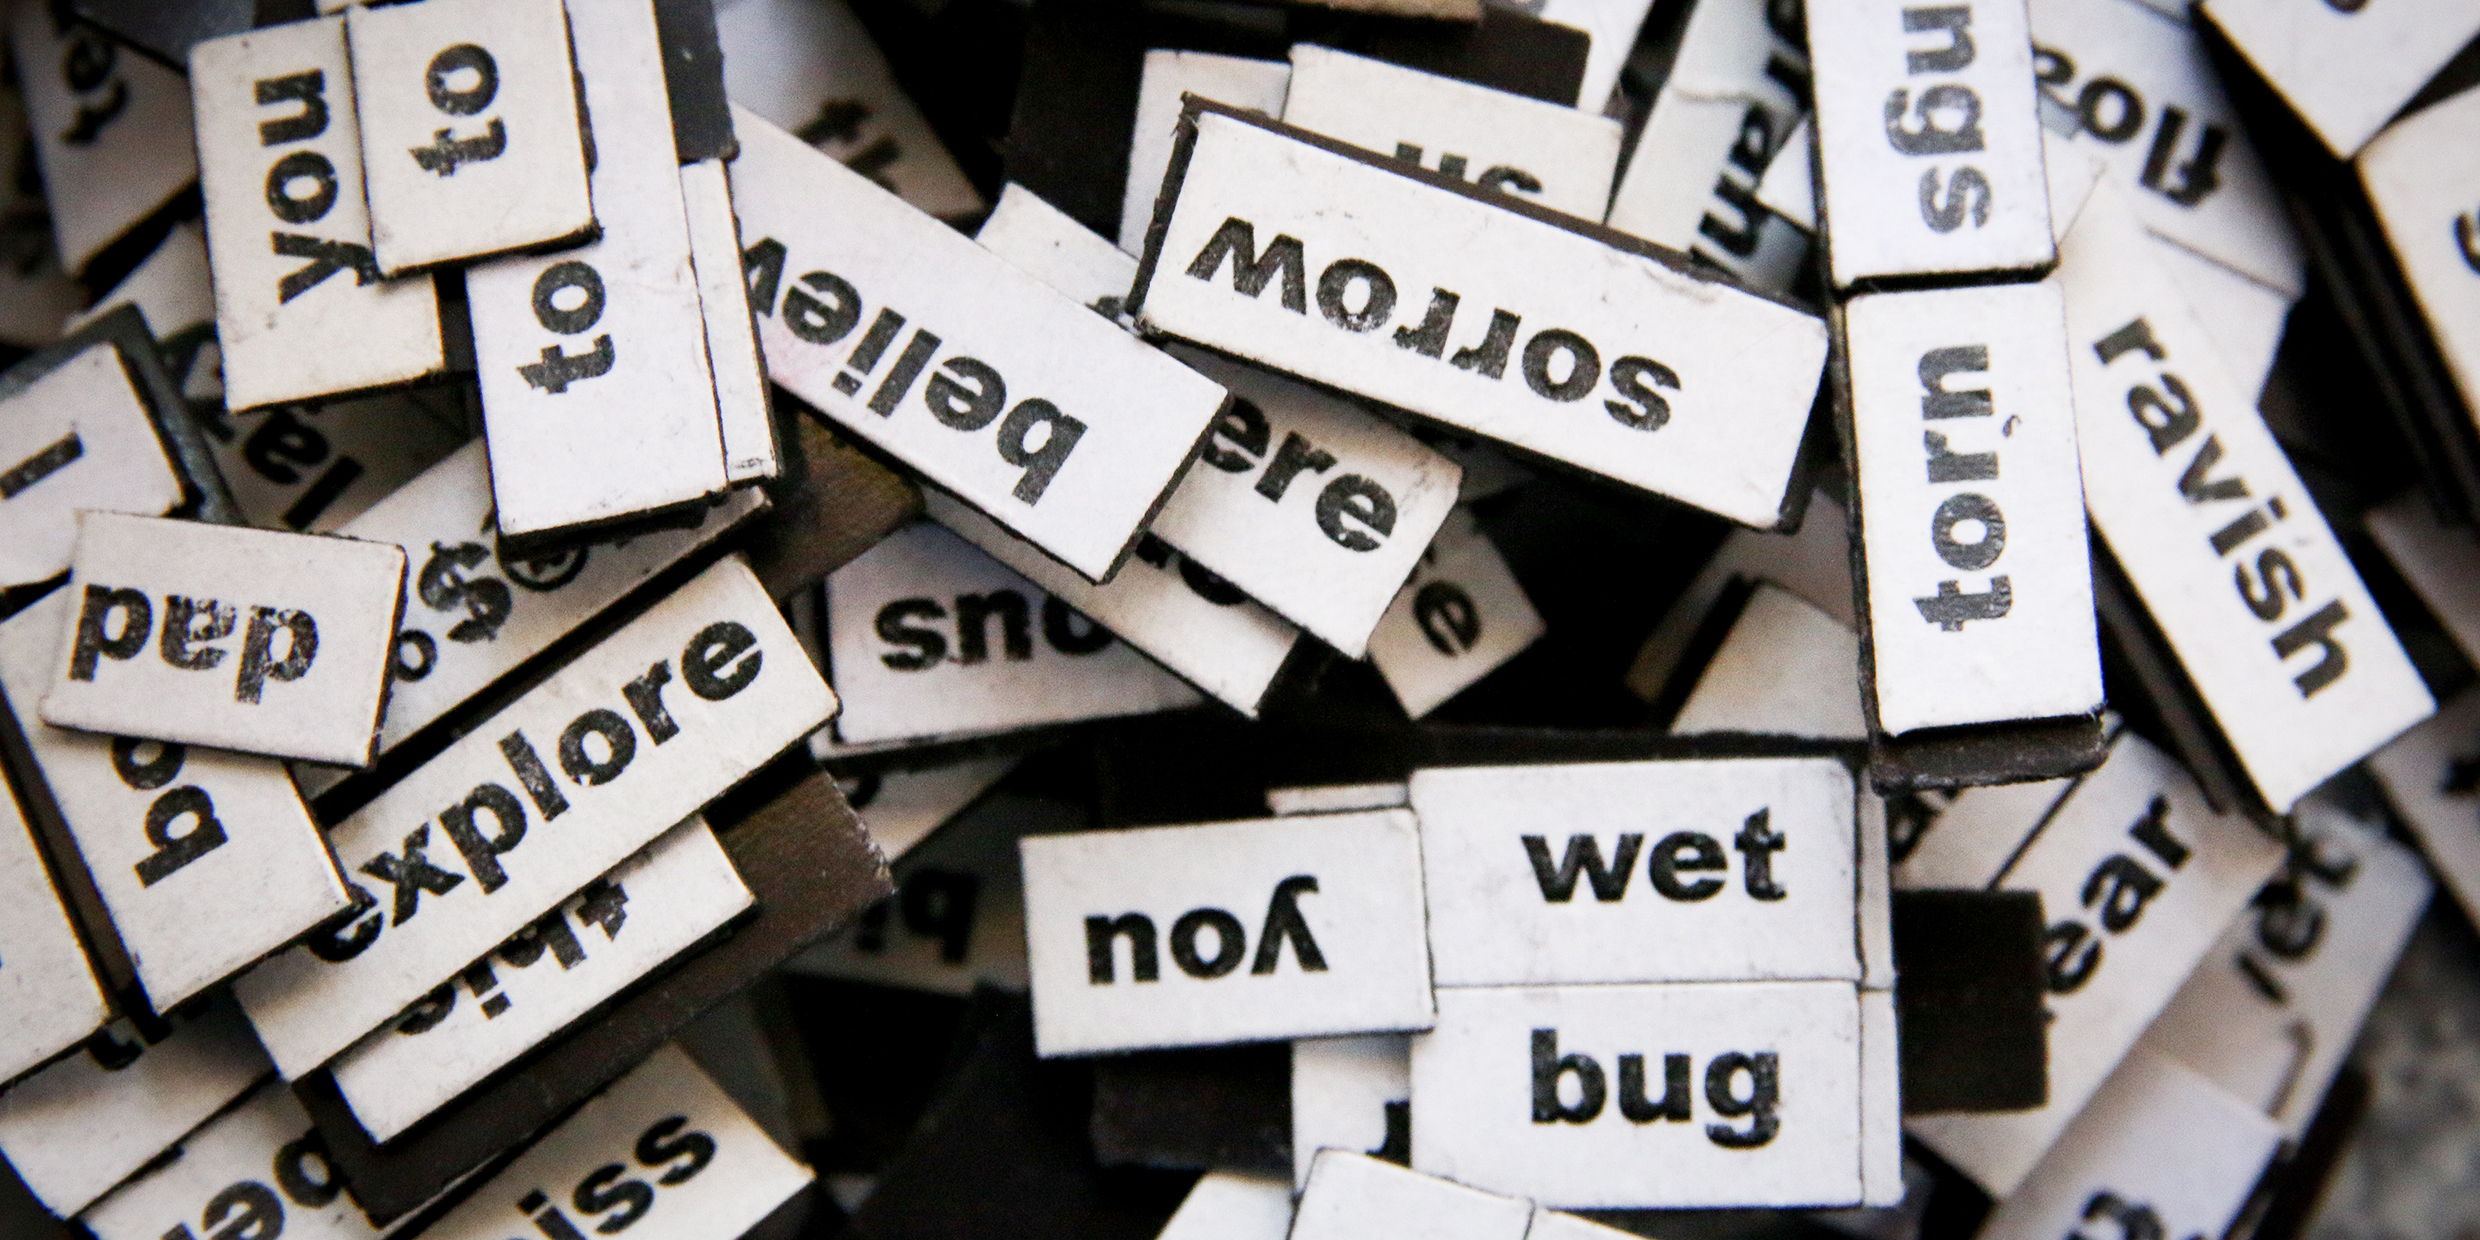 Image of a pile of jumbled word tiles